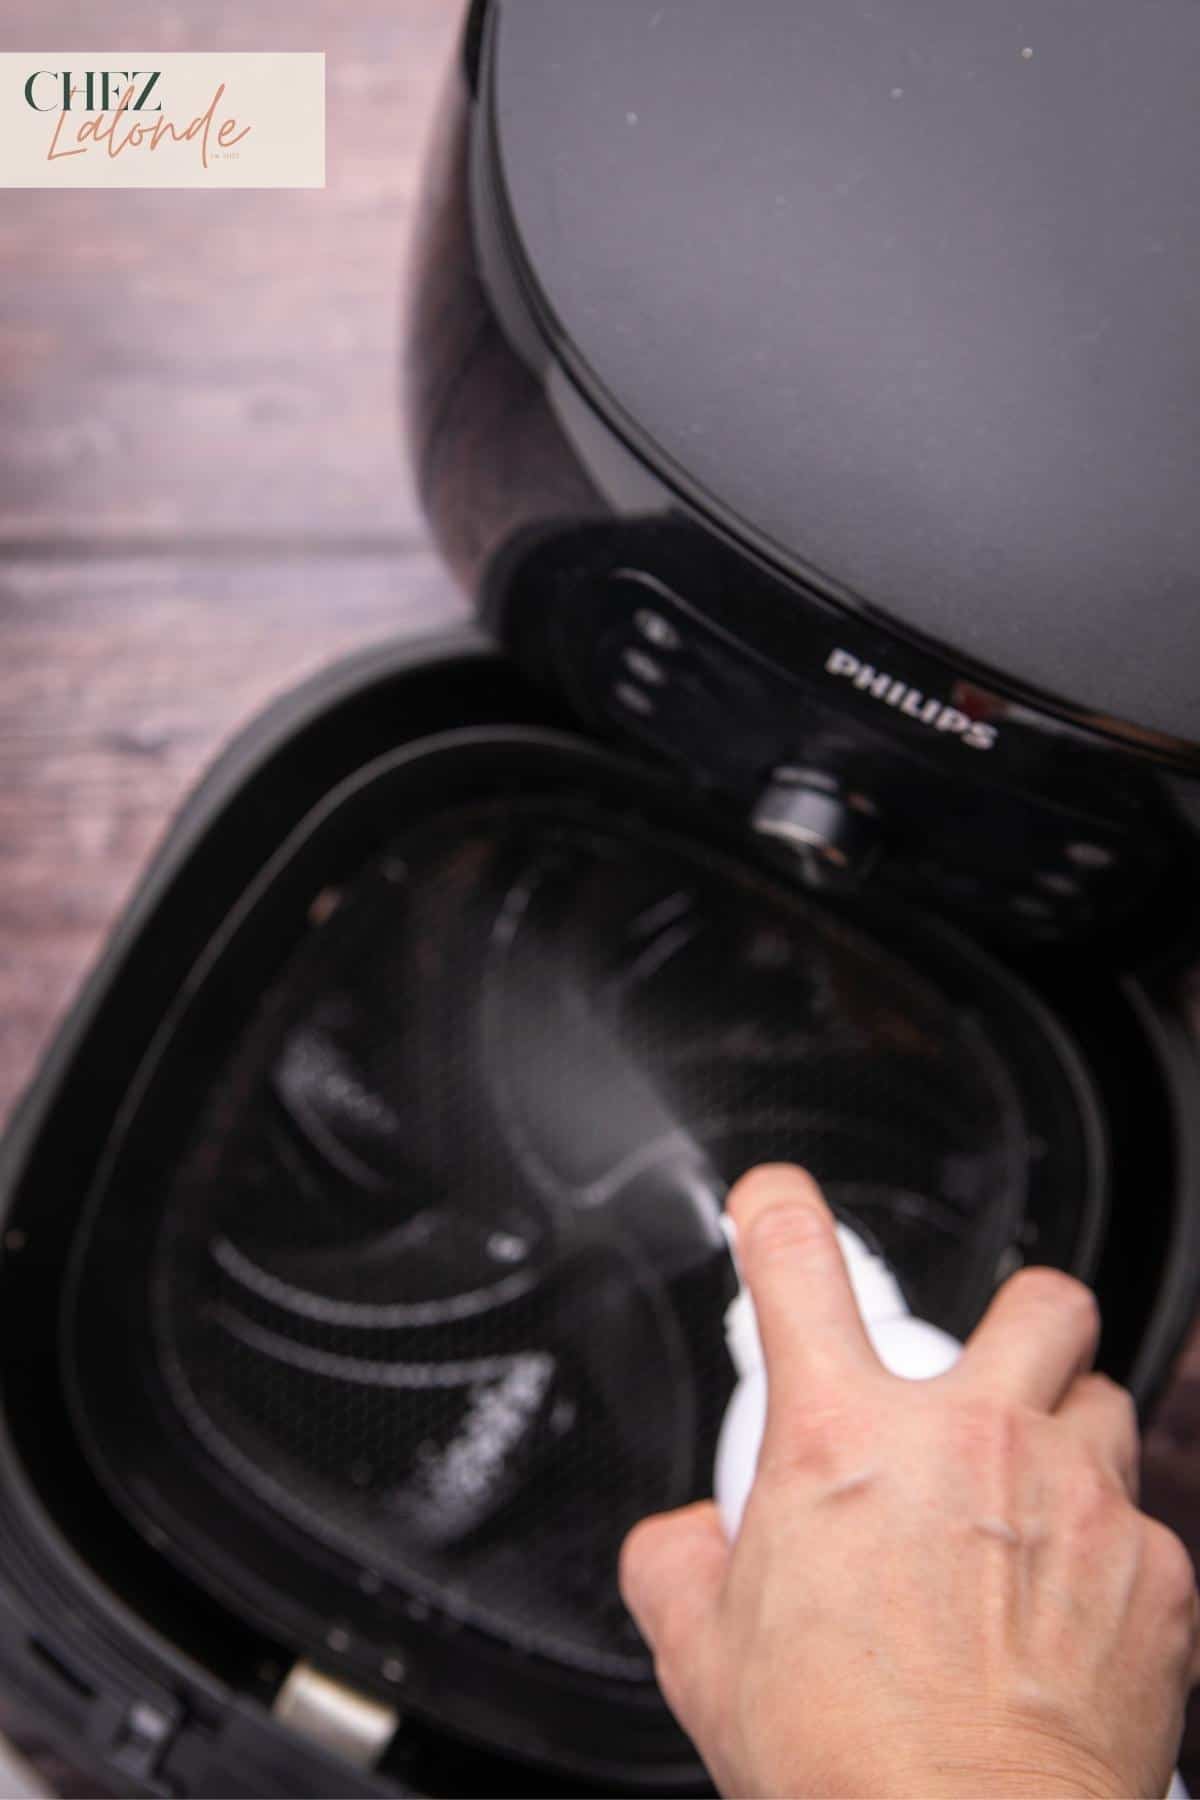 Using a cooking spray to spray the air fryer basket to prevent sticking.